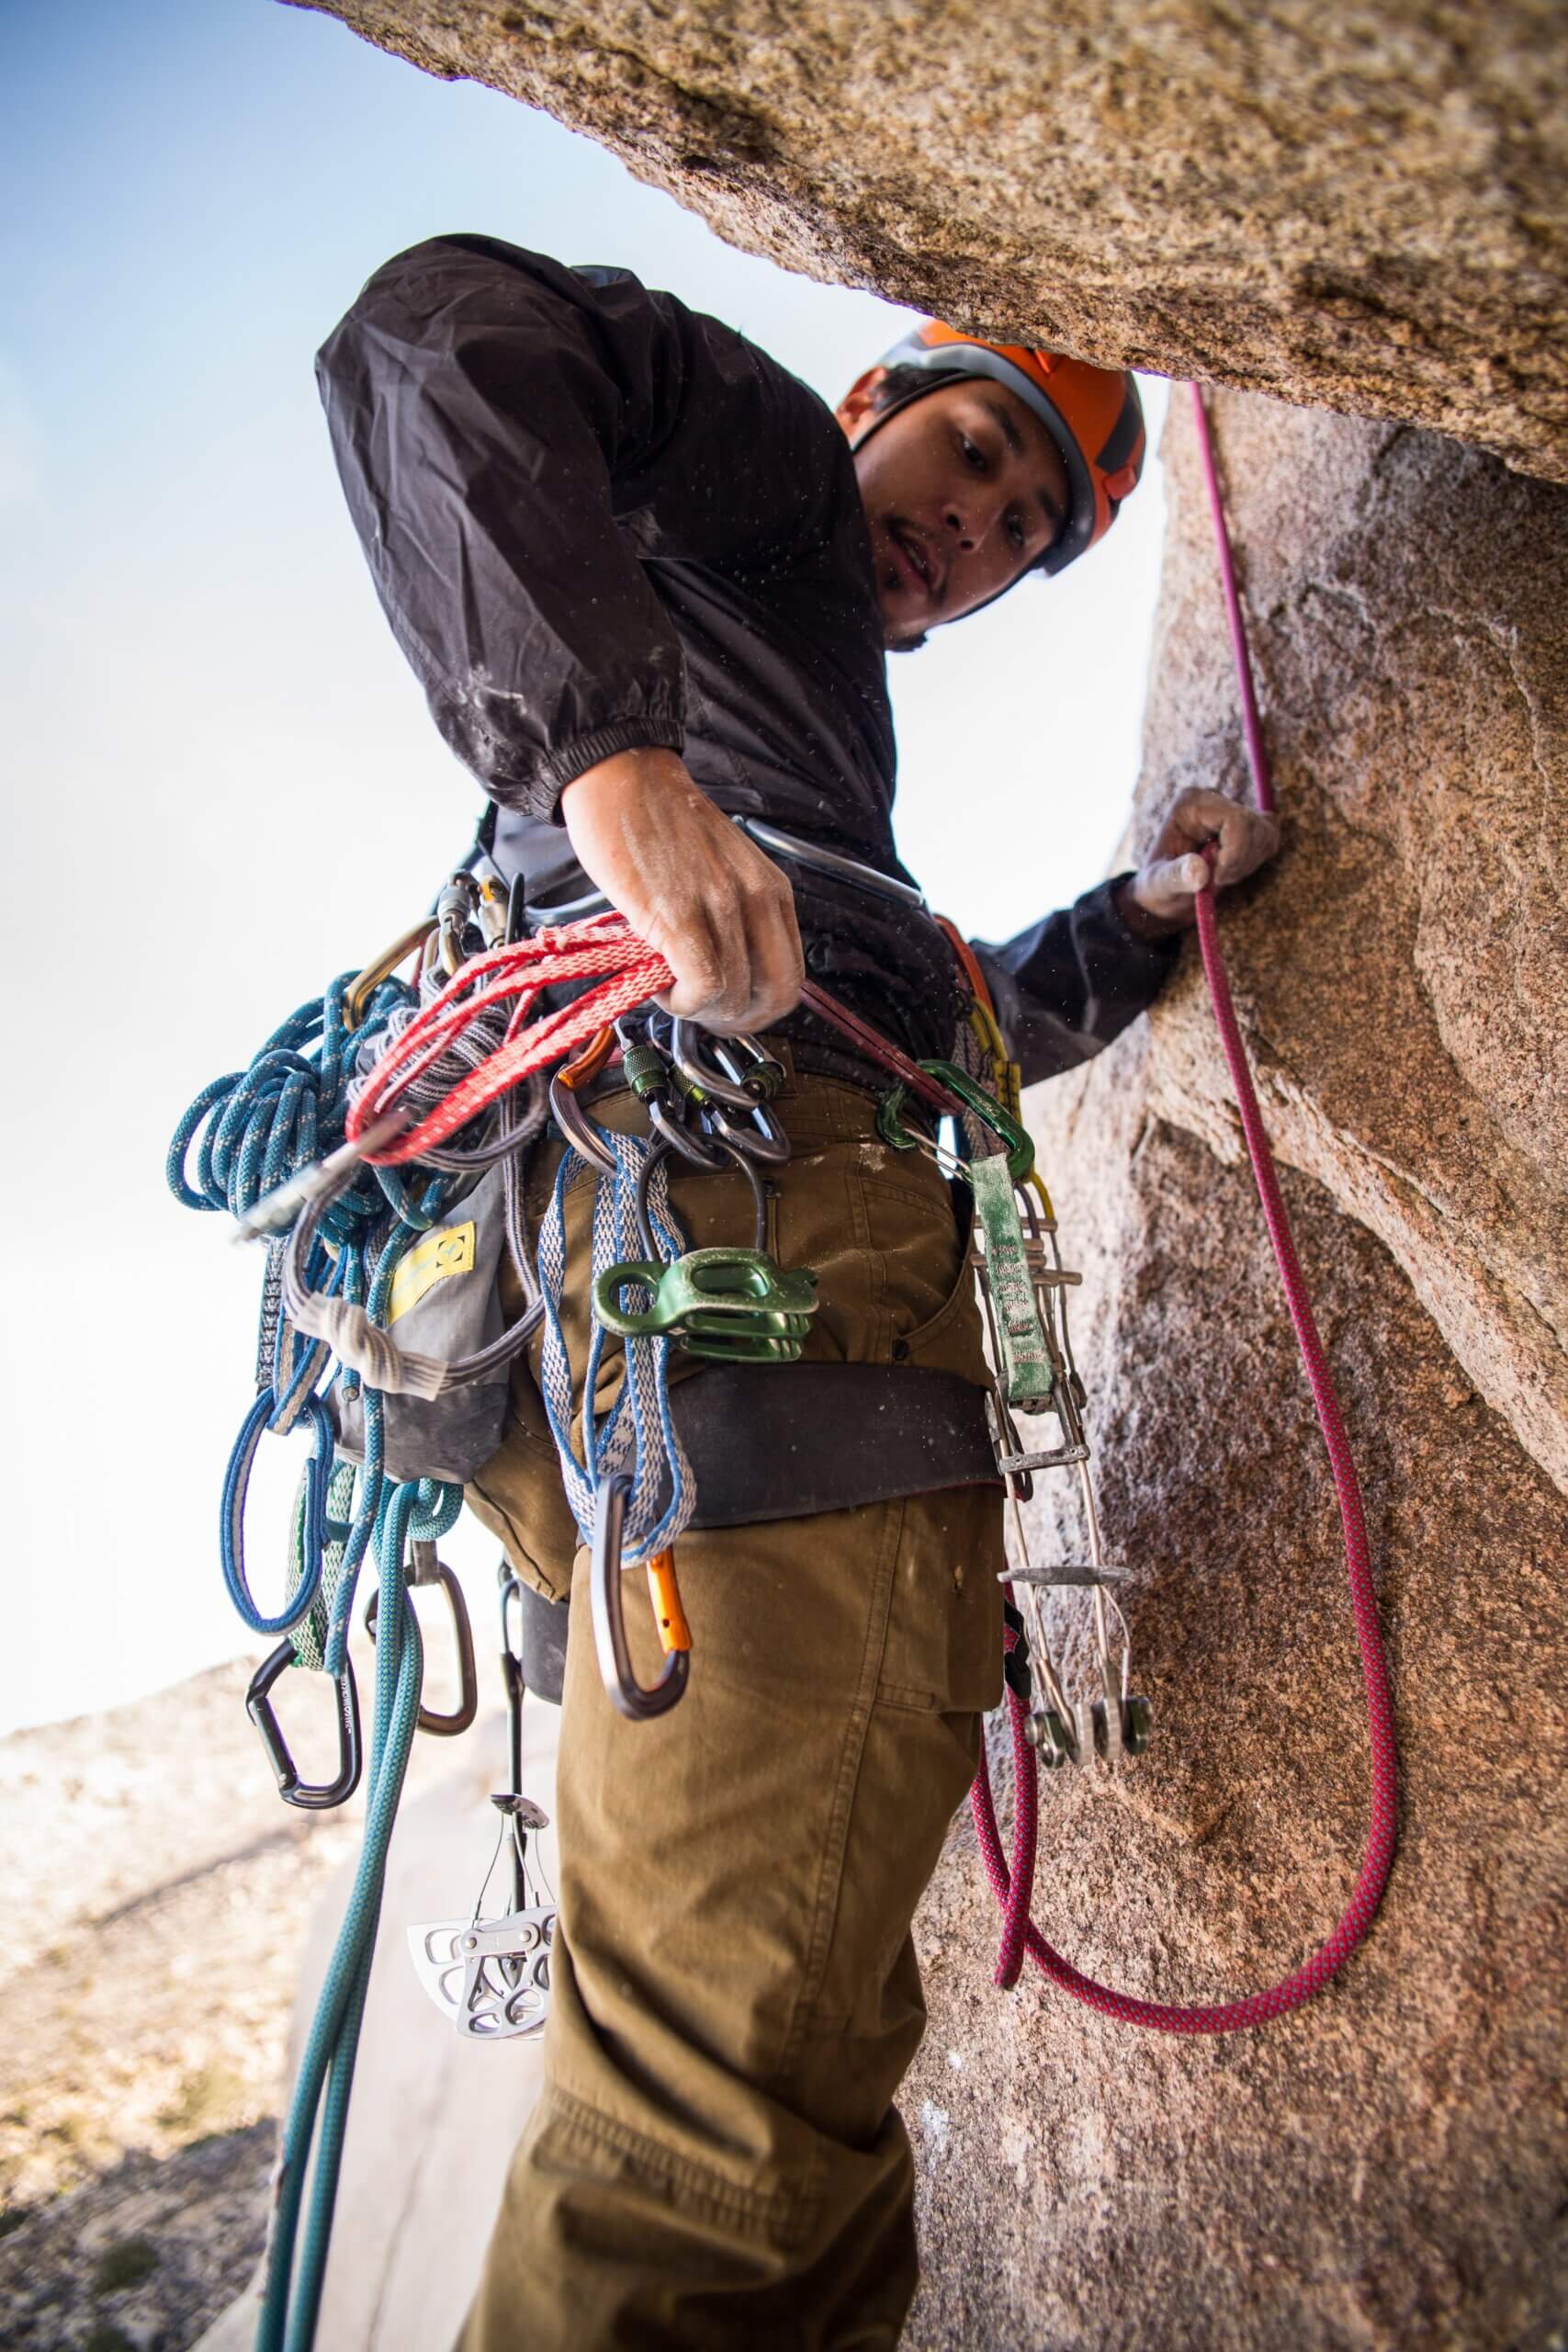 man checking carabiners and gear on climbing harness